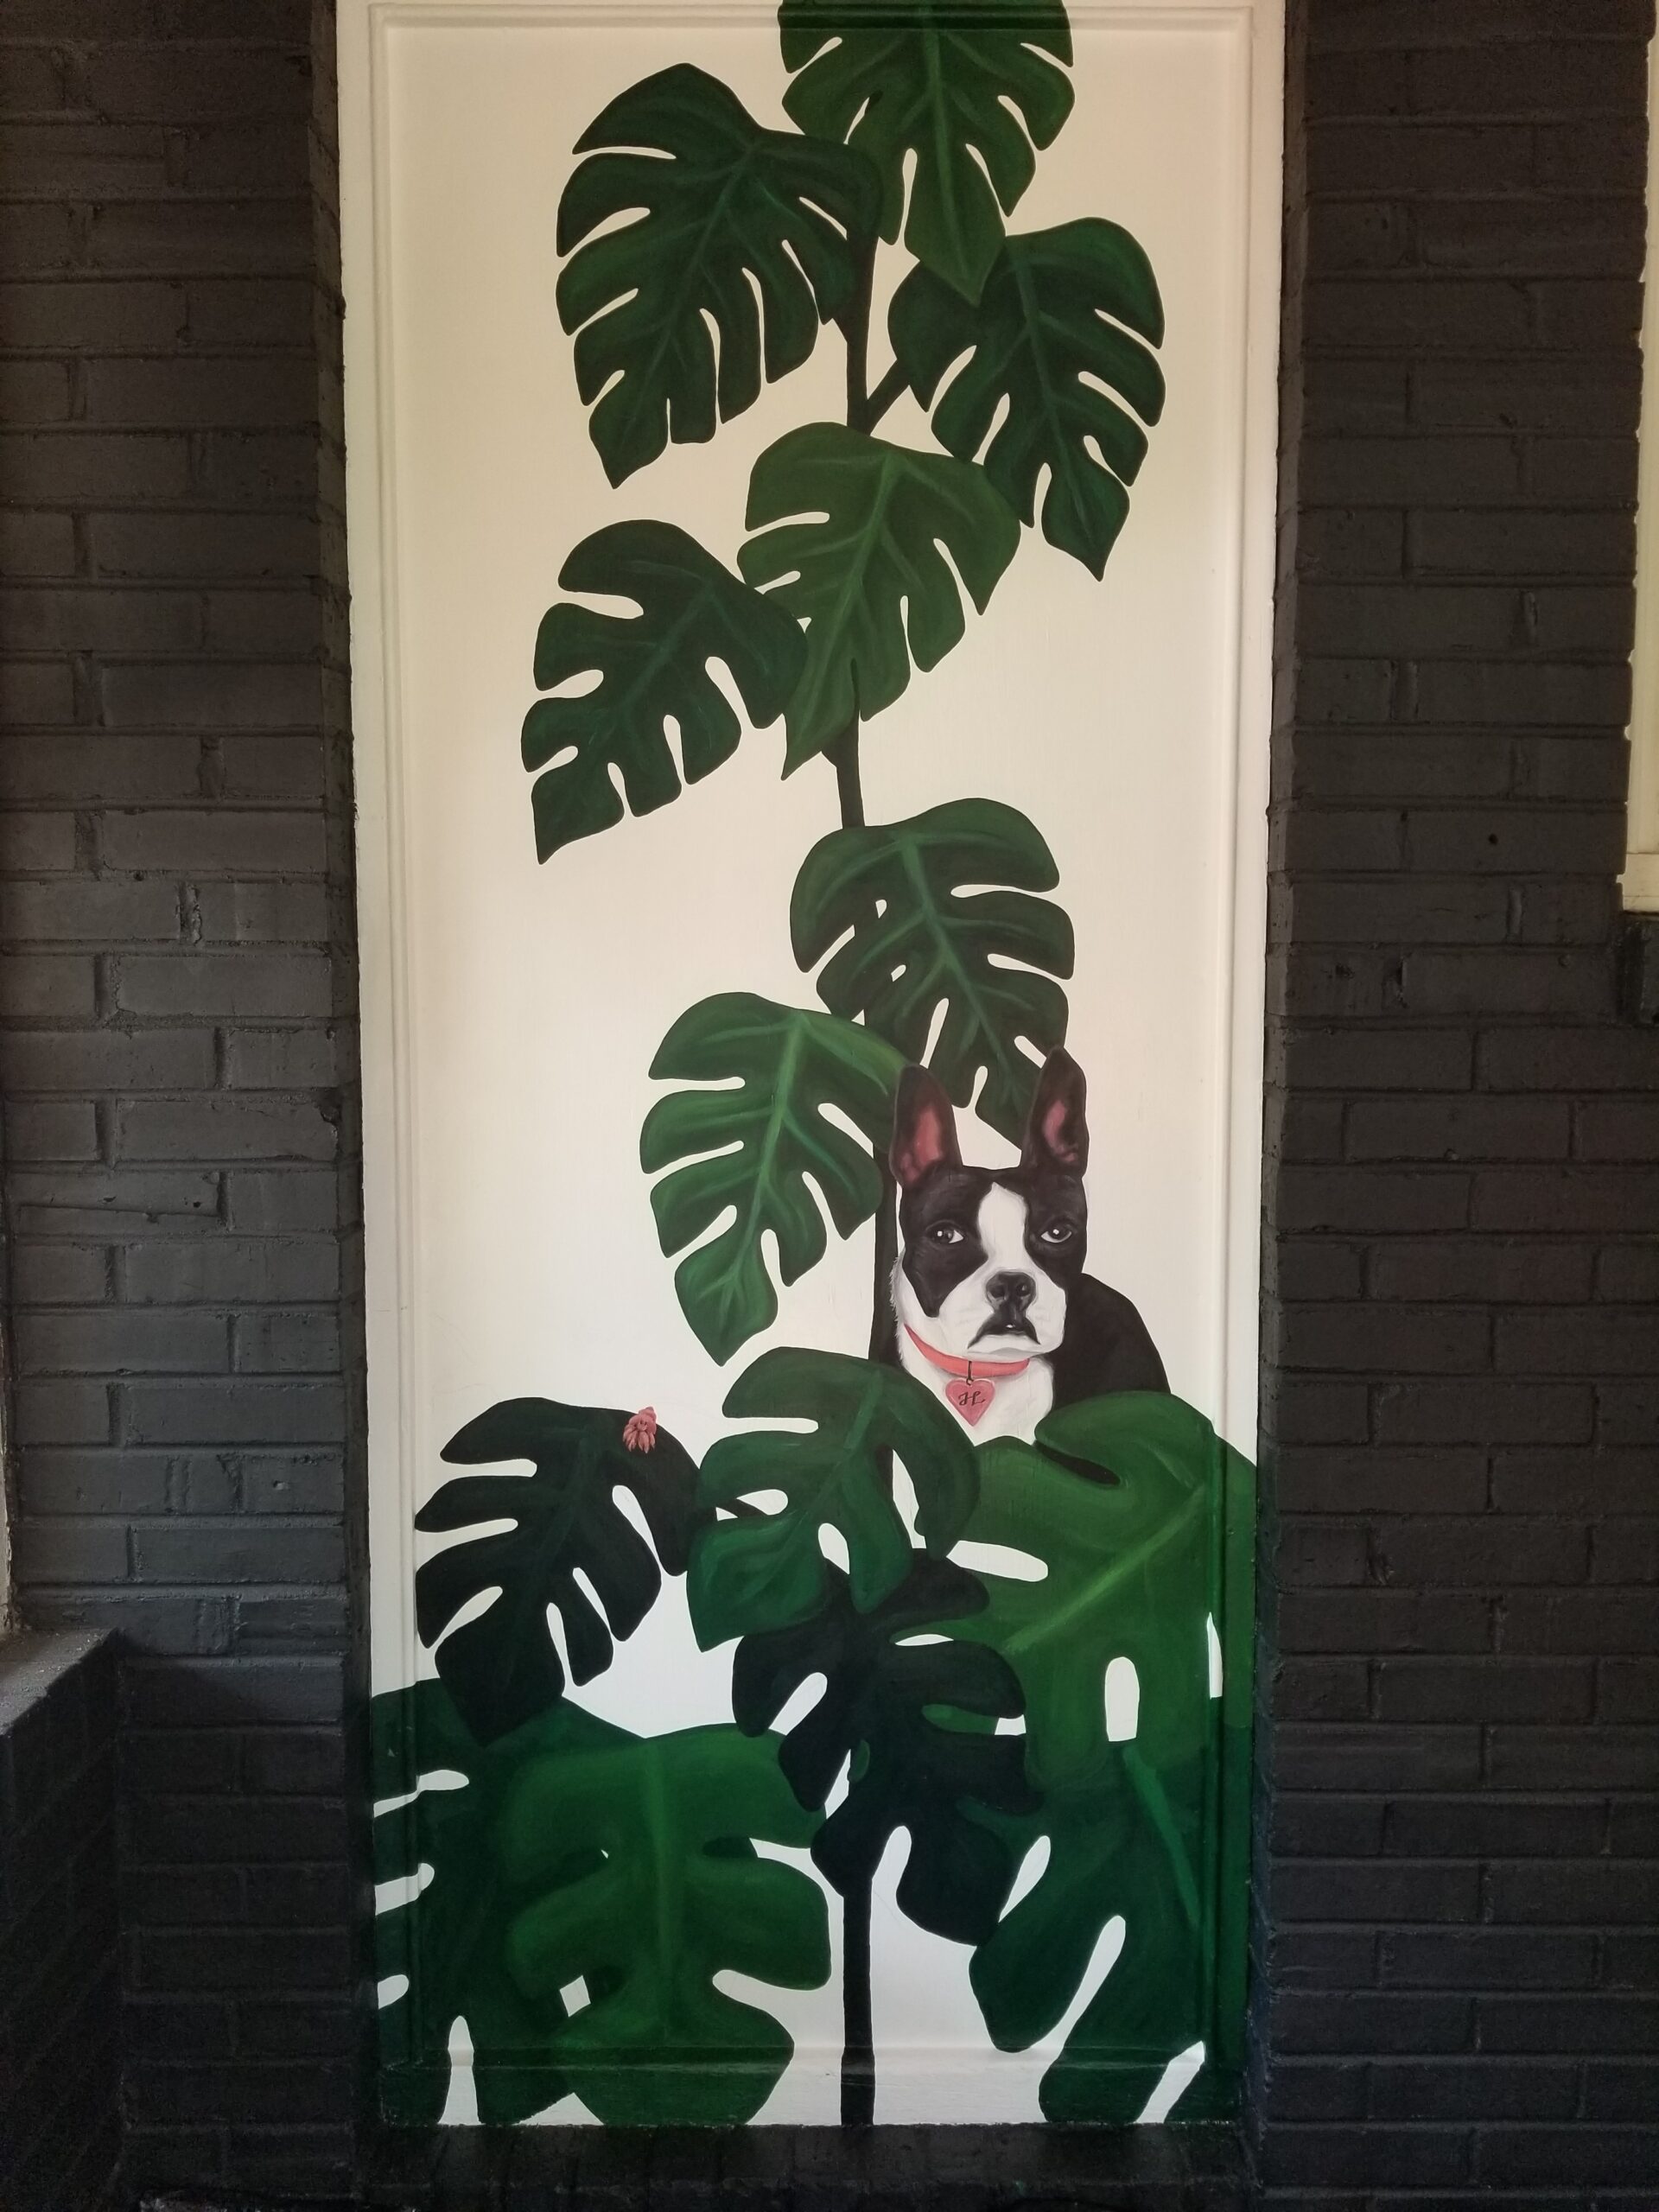 A white door surrounded by bricks painted black. The door is covered with a mural depicting a monstera plant with very large leaves, and hiding among a mass of those leaves at the bottom of the door is a black and white dog.